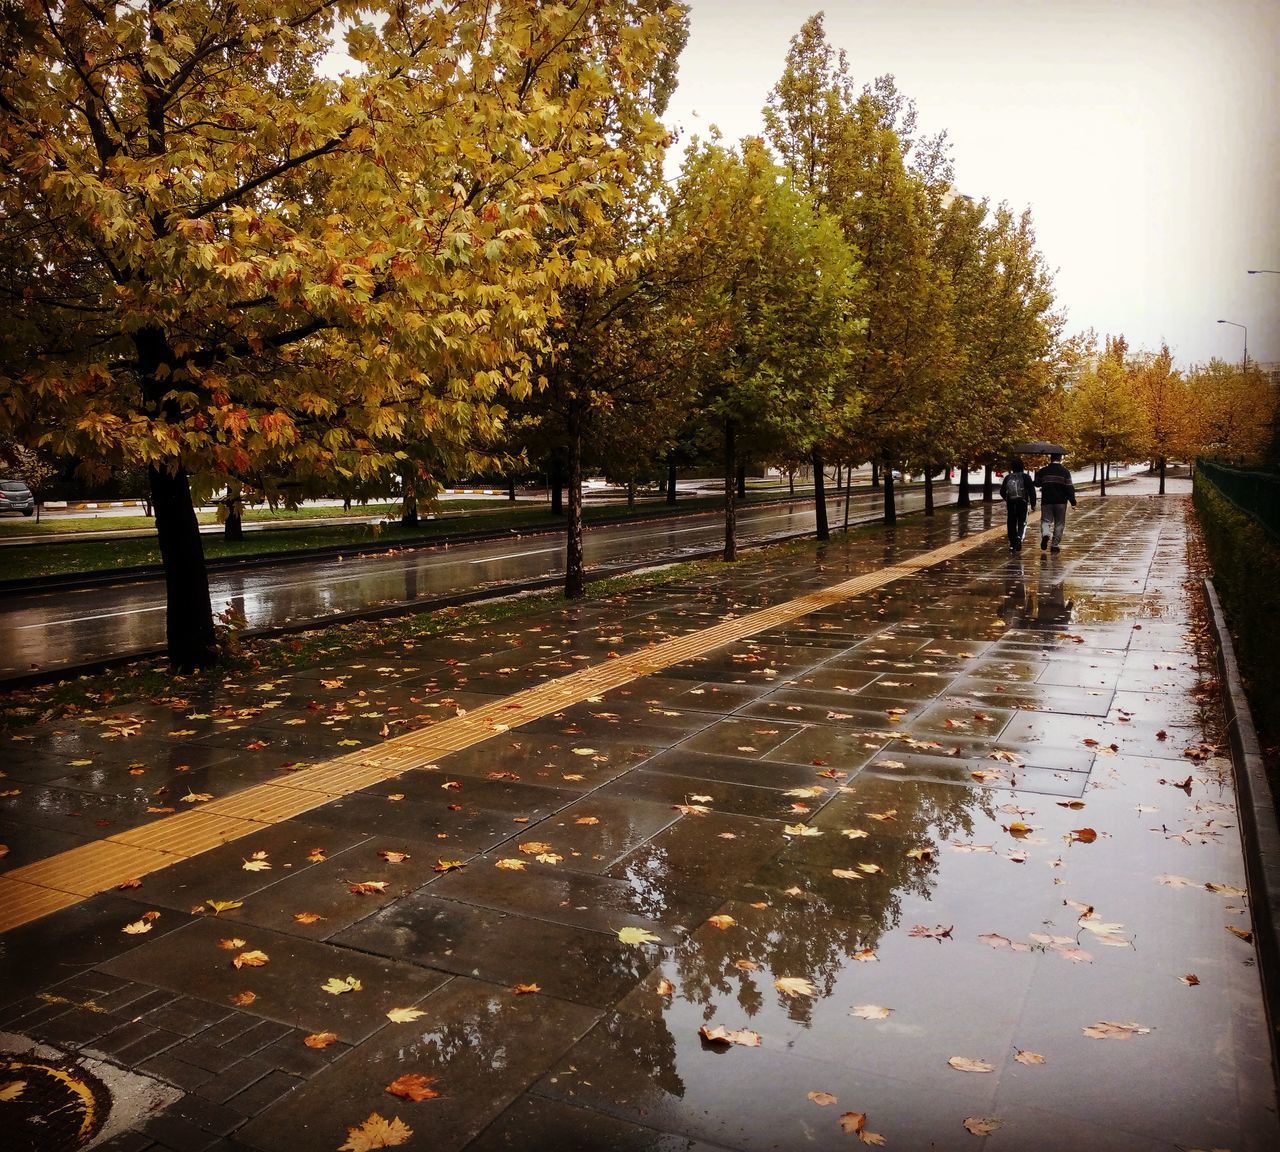 WET STREET AMIDST TREES DURING AUTUMN